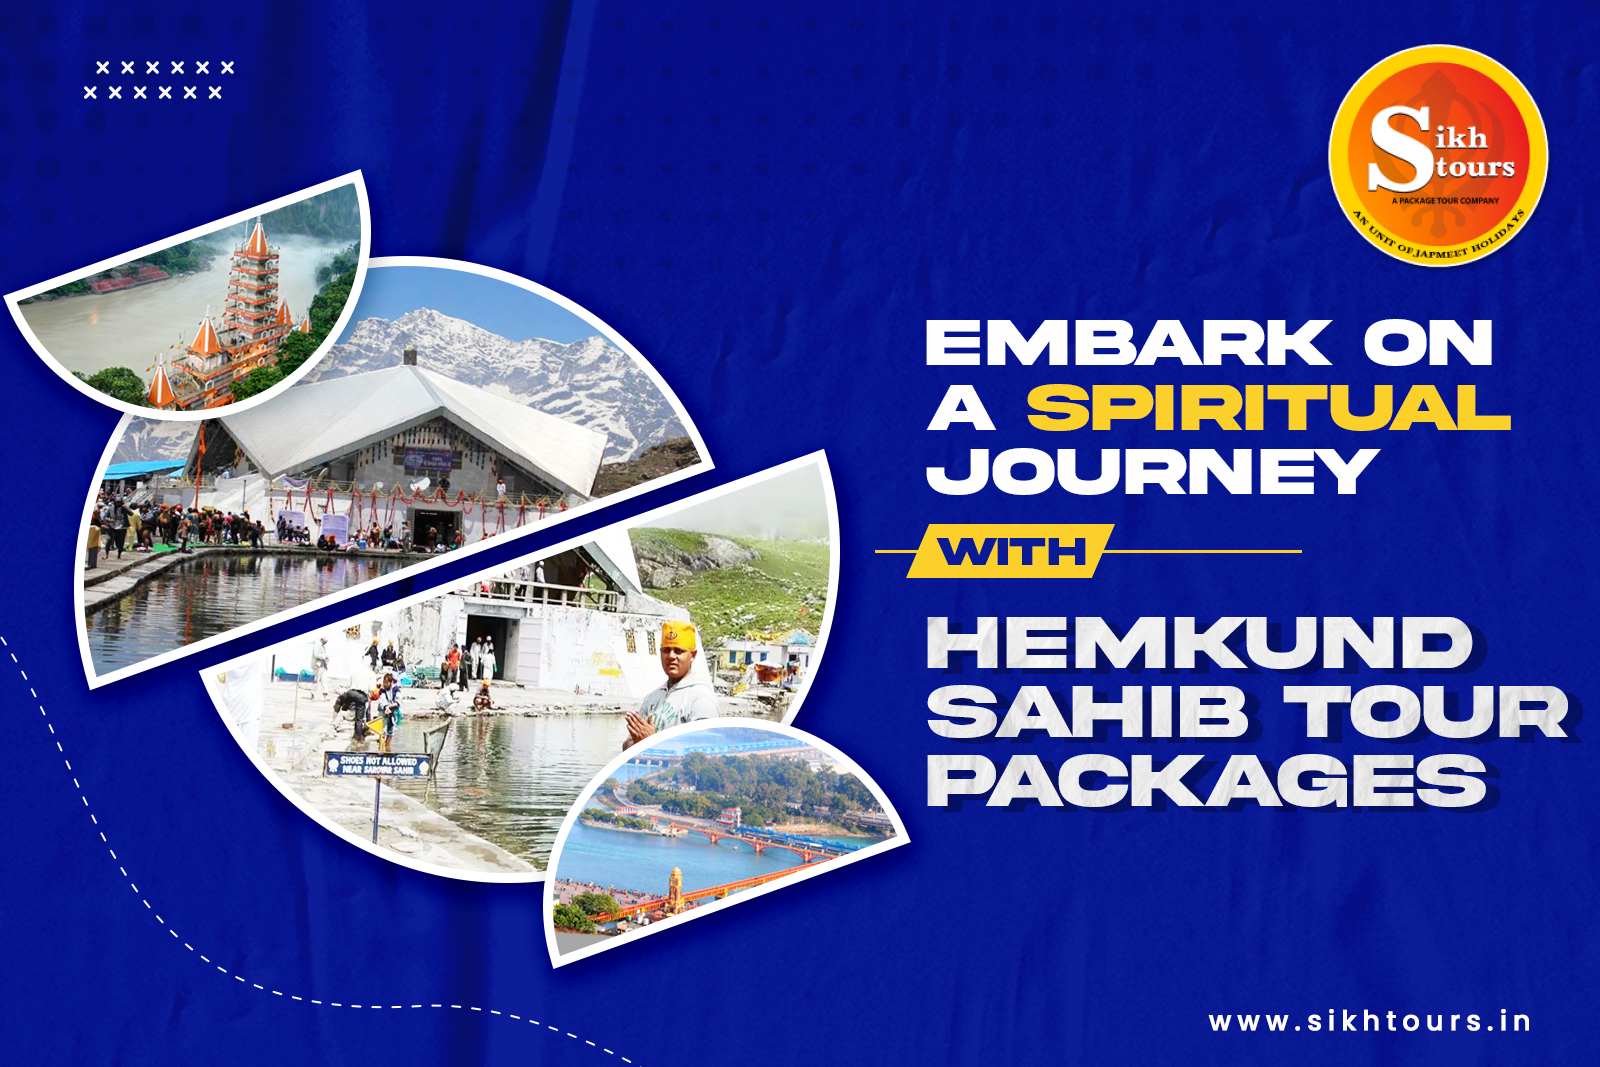 Embark on a Spiritual Journey with Hemkund Sahib Tour Packages